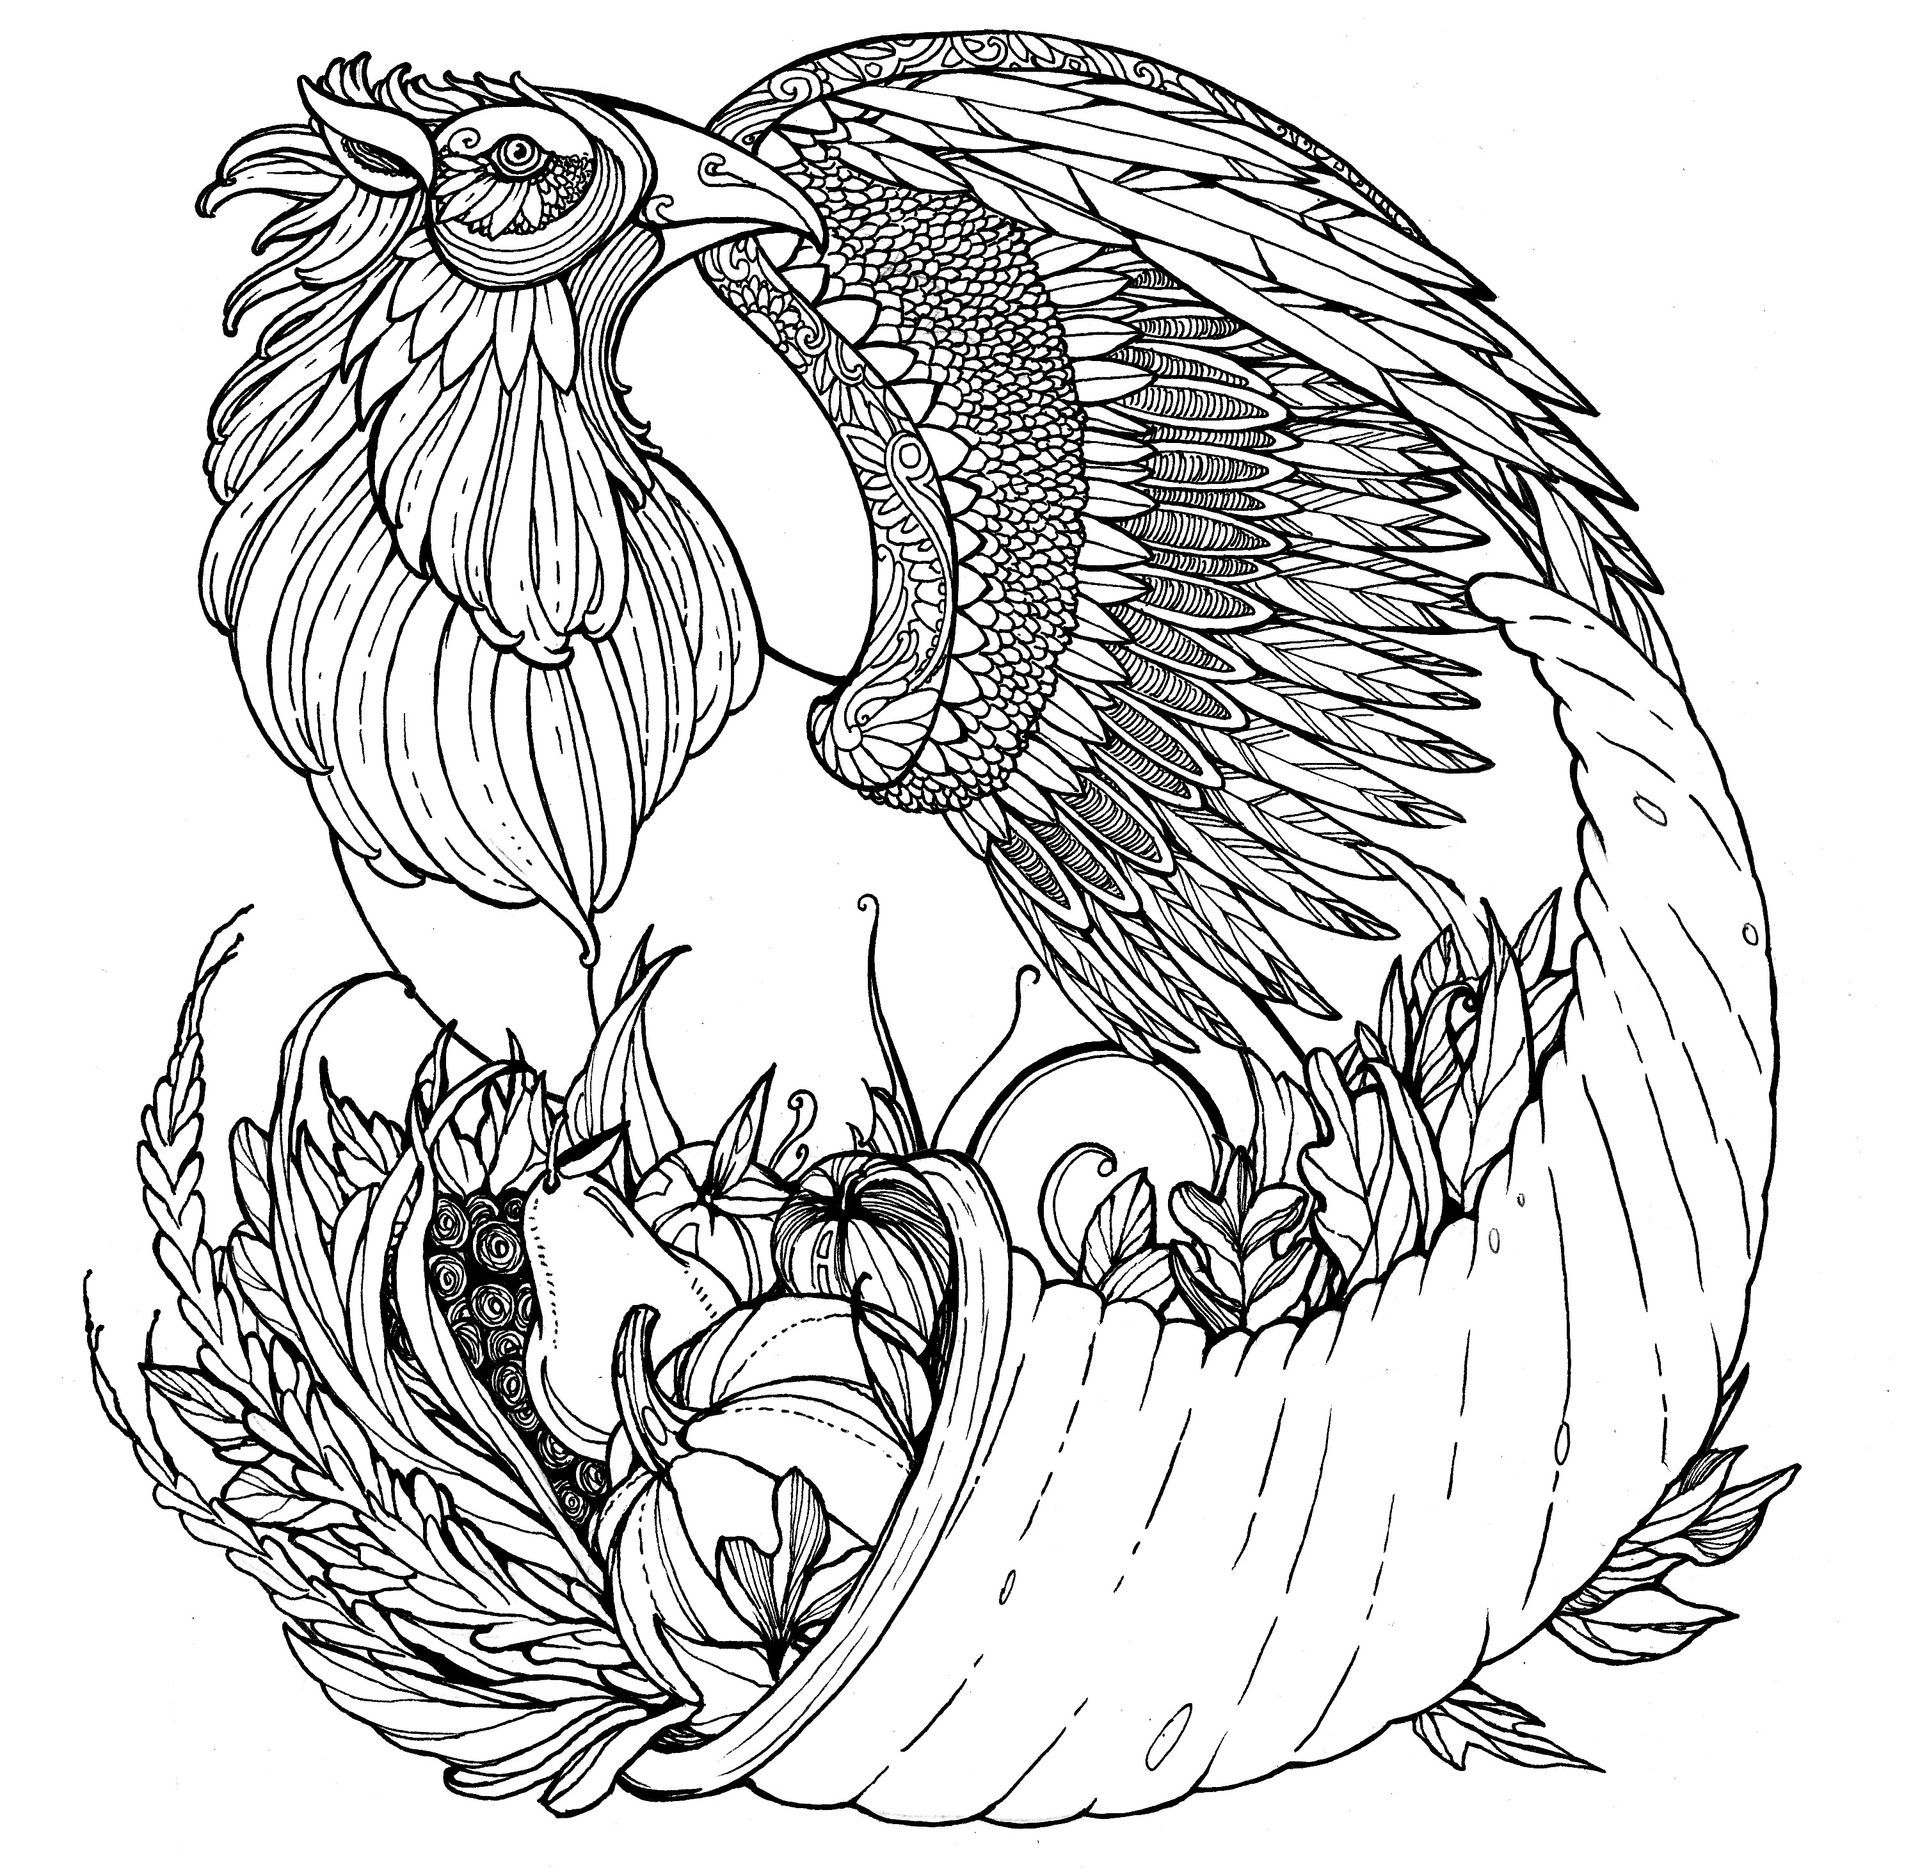 image of a black and white stylized gryphon